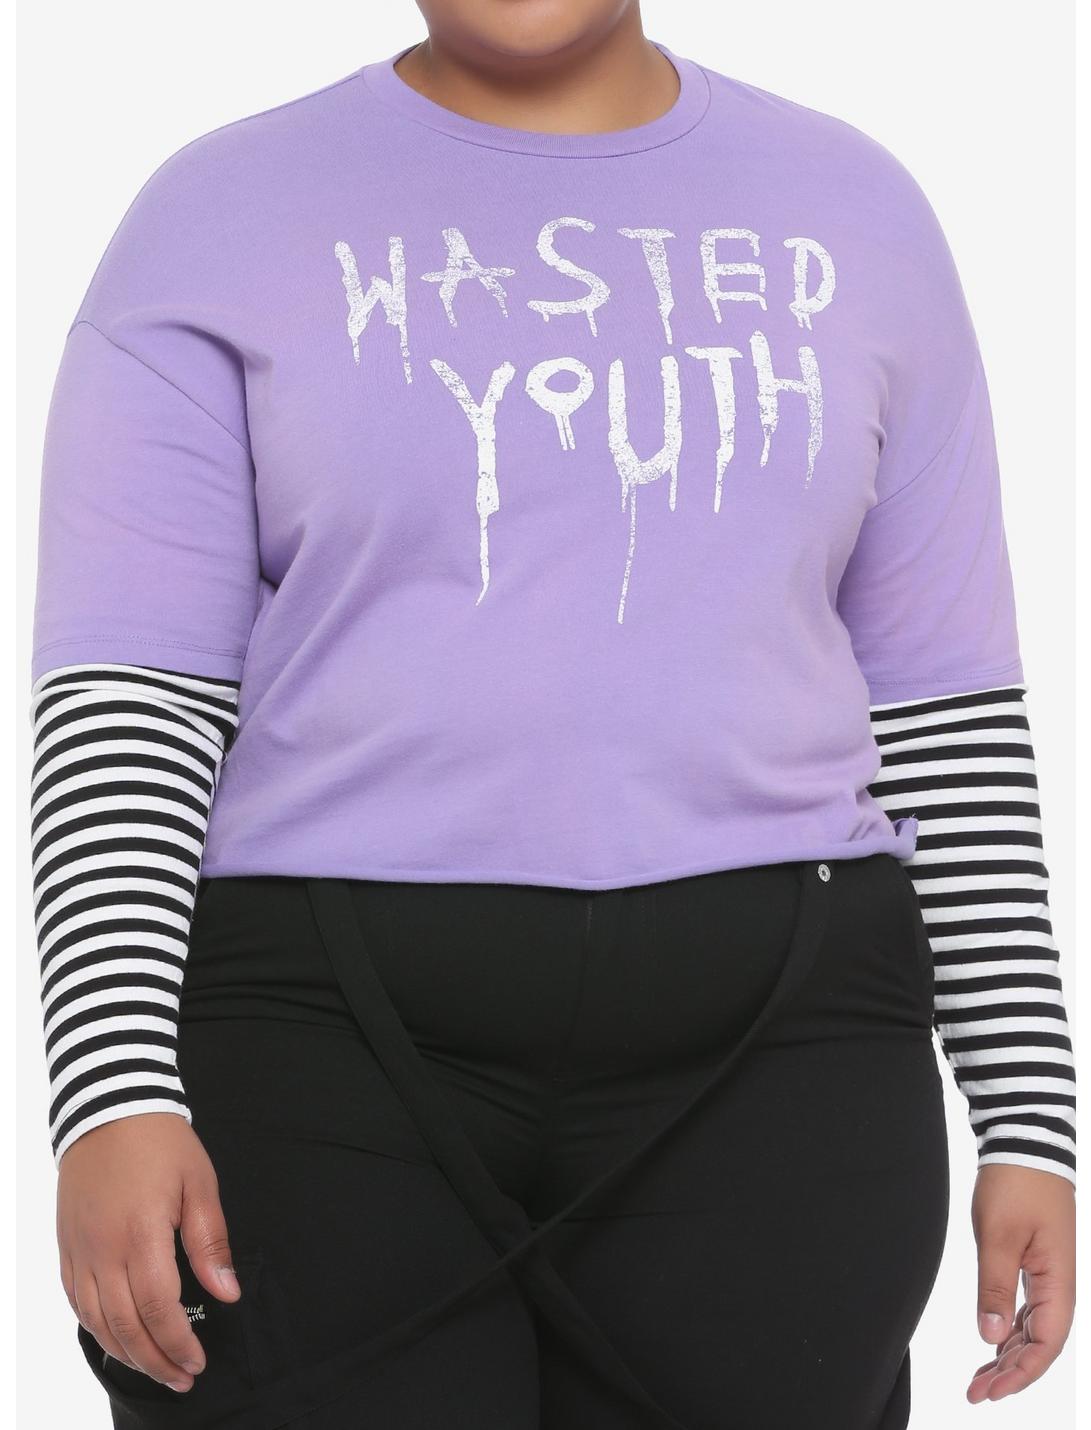 Wasted Youth Girls Crop Long-Sleeve T-Shirt Plus Size, BLACK, hi-res